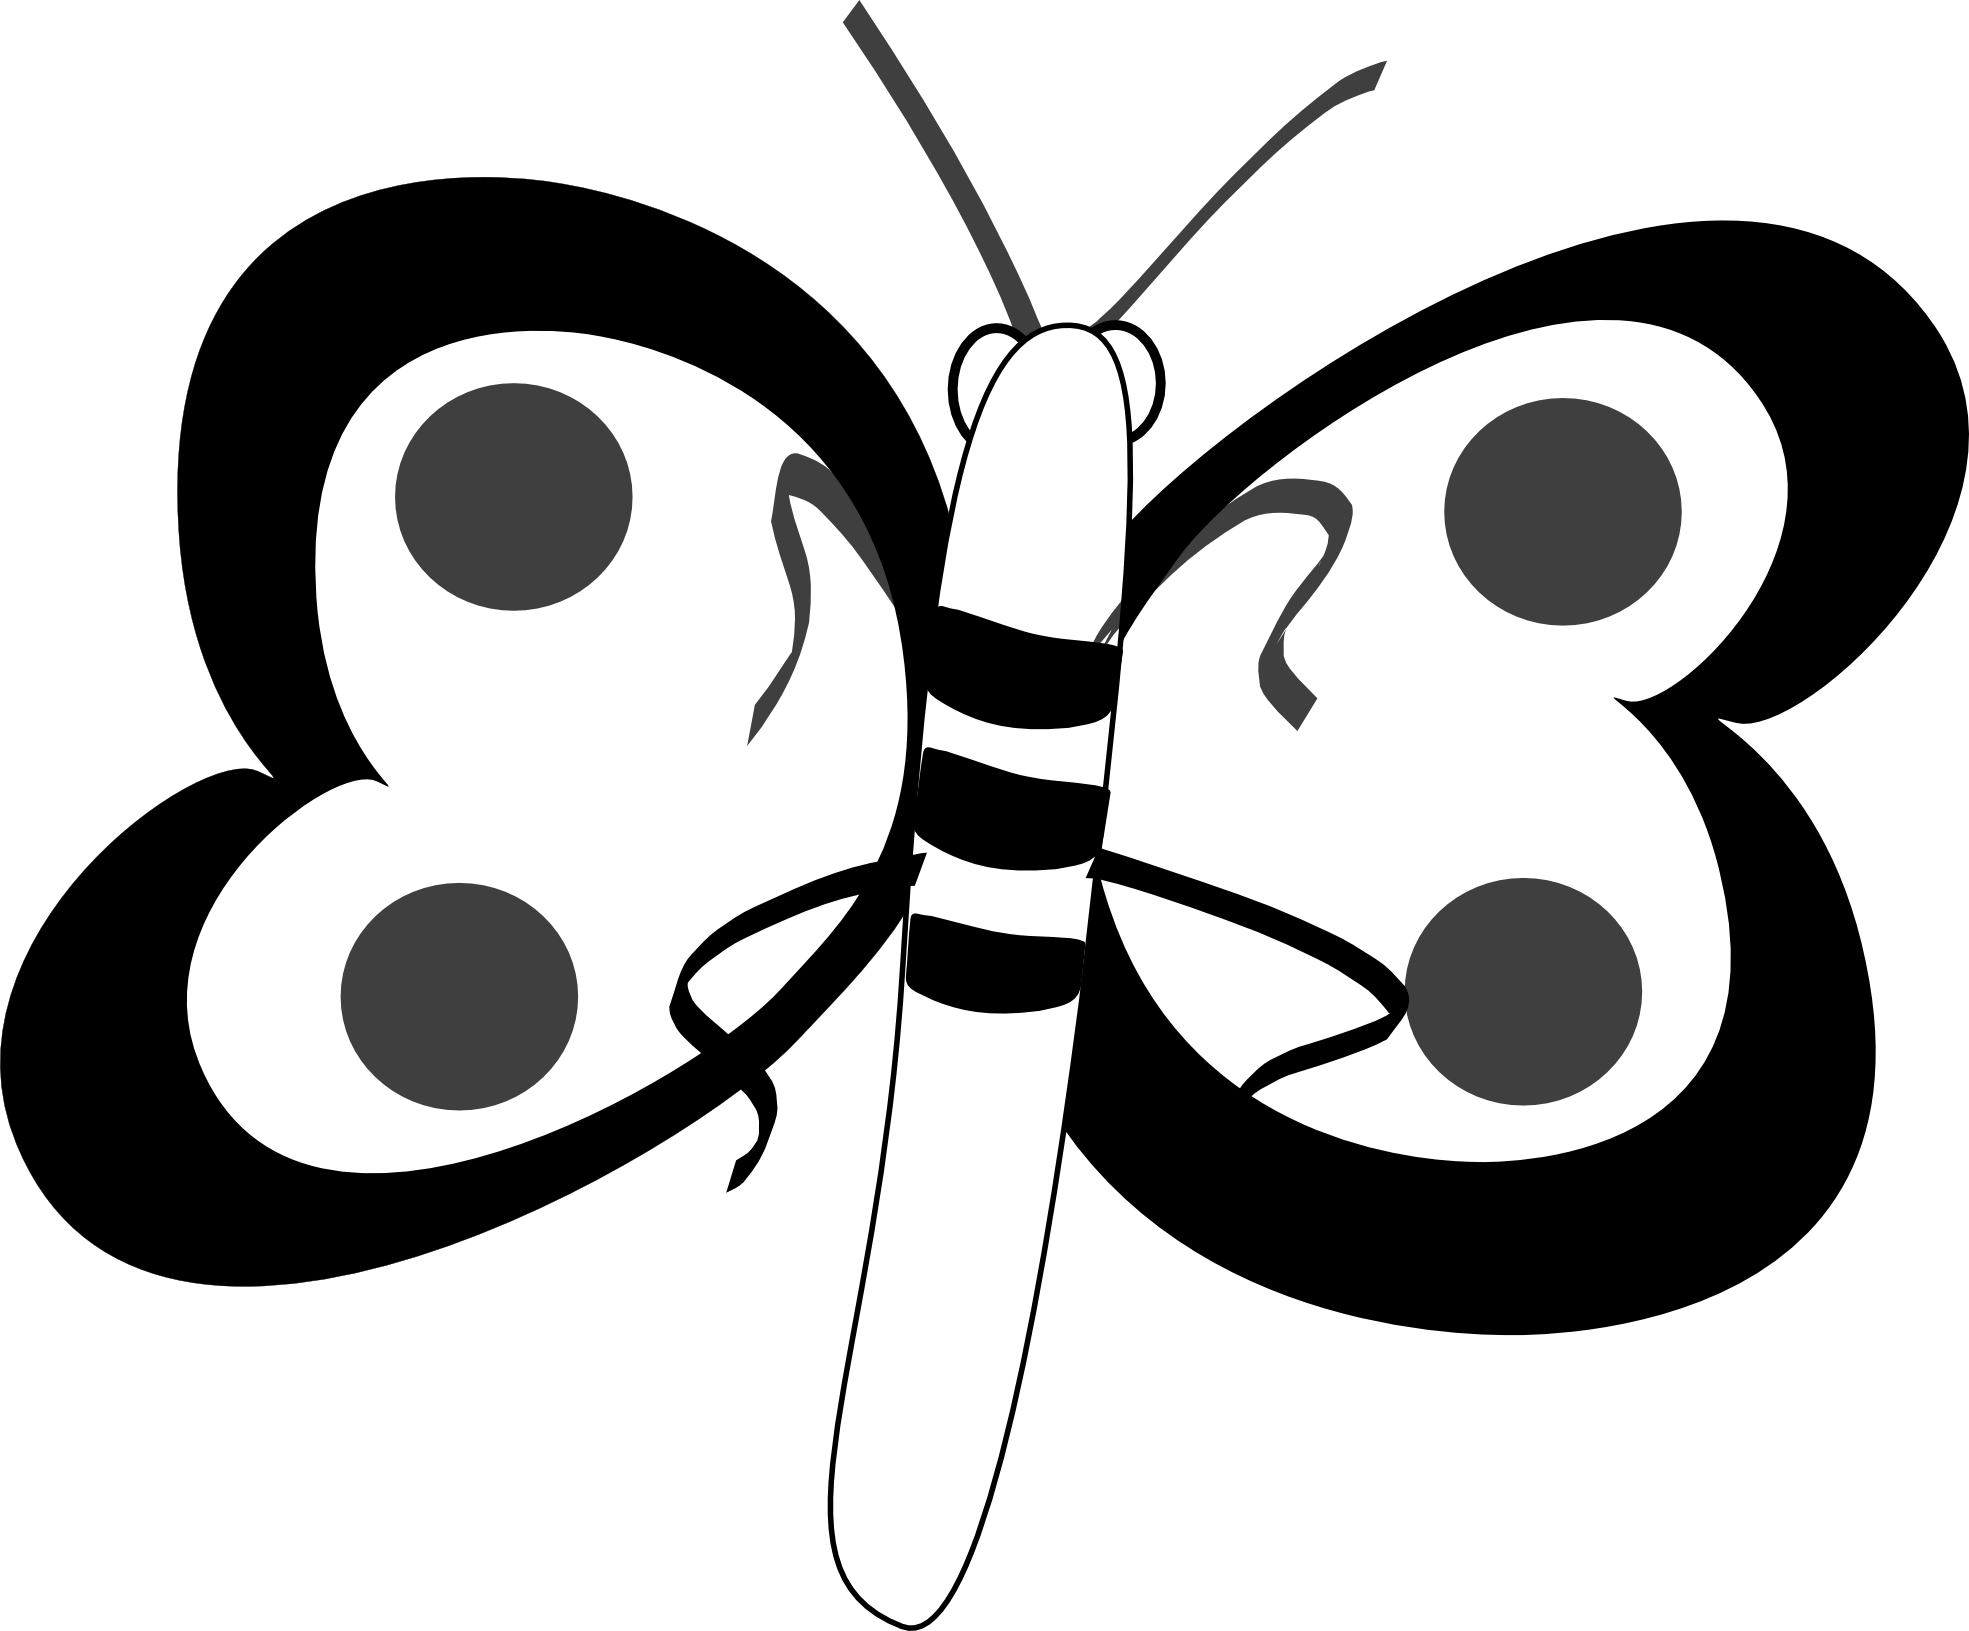 Hands clipart butterfly. Hand black and white